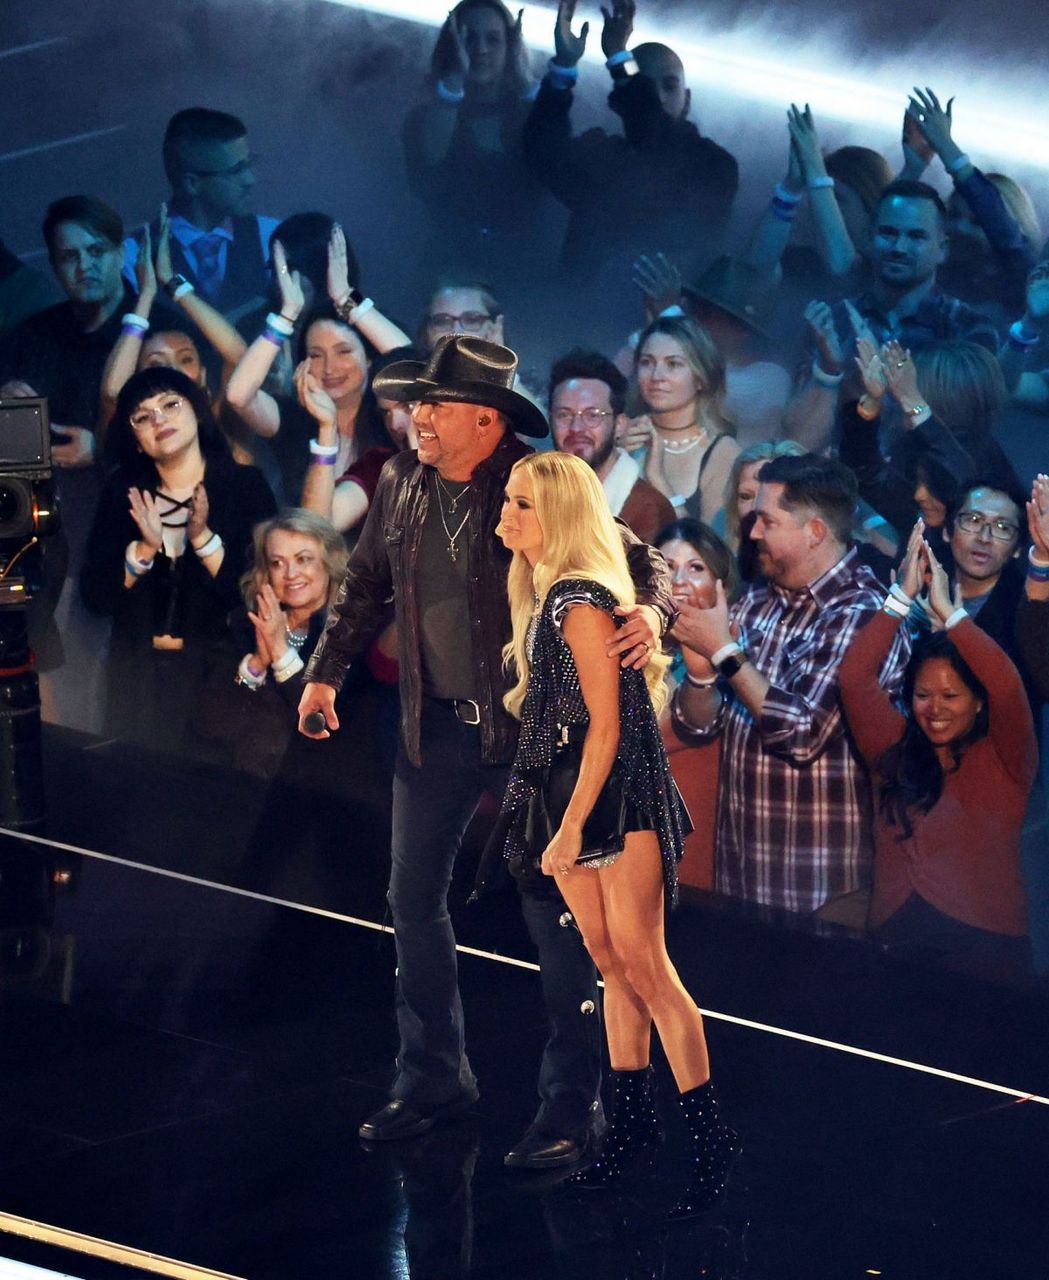 Carrie Underwood Performs 2022 Academy Of Country Music Awards